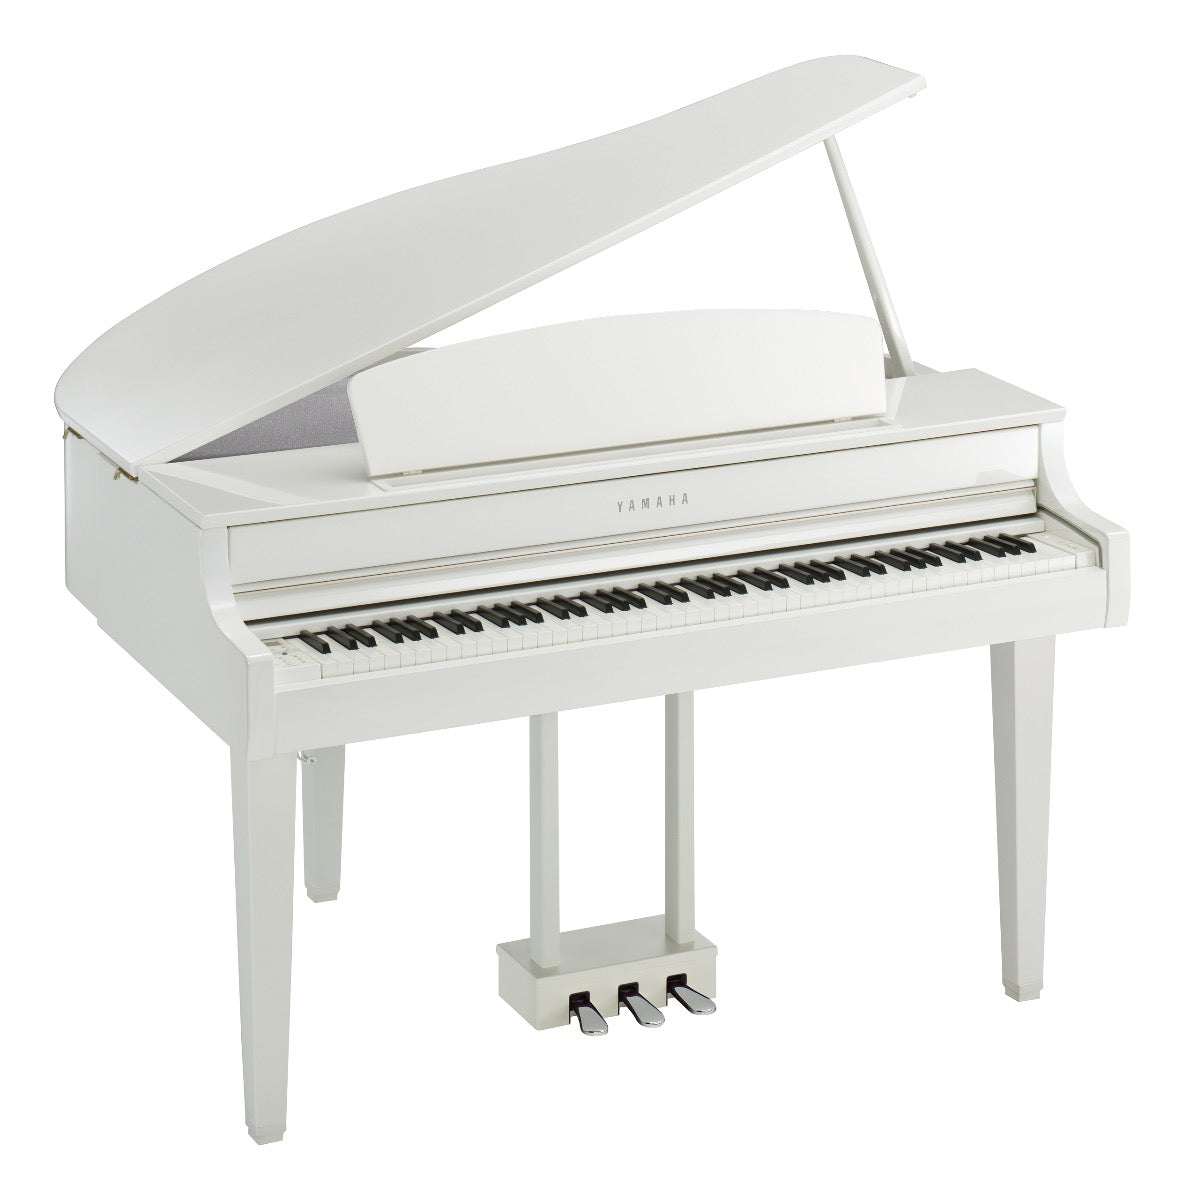 3/4 view of Yamaha Clavinova CLP-765GP Digital Piano - Polished White showing front, top and left side